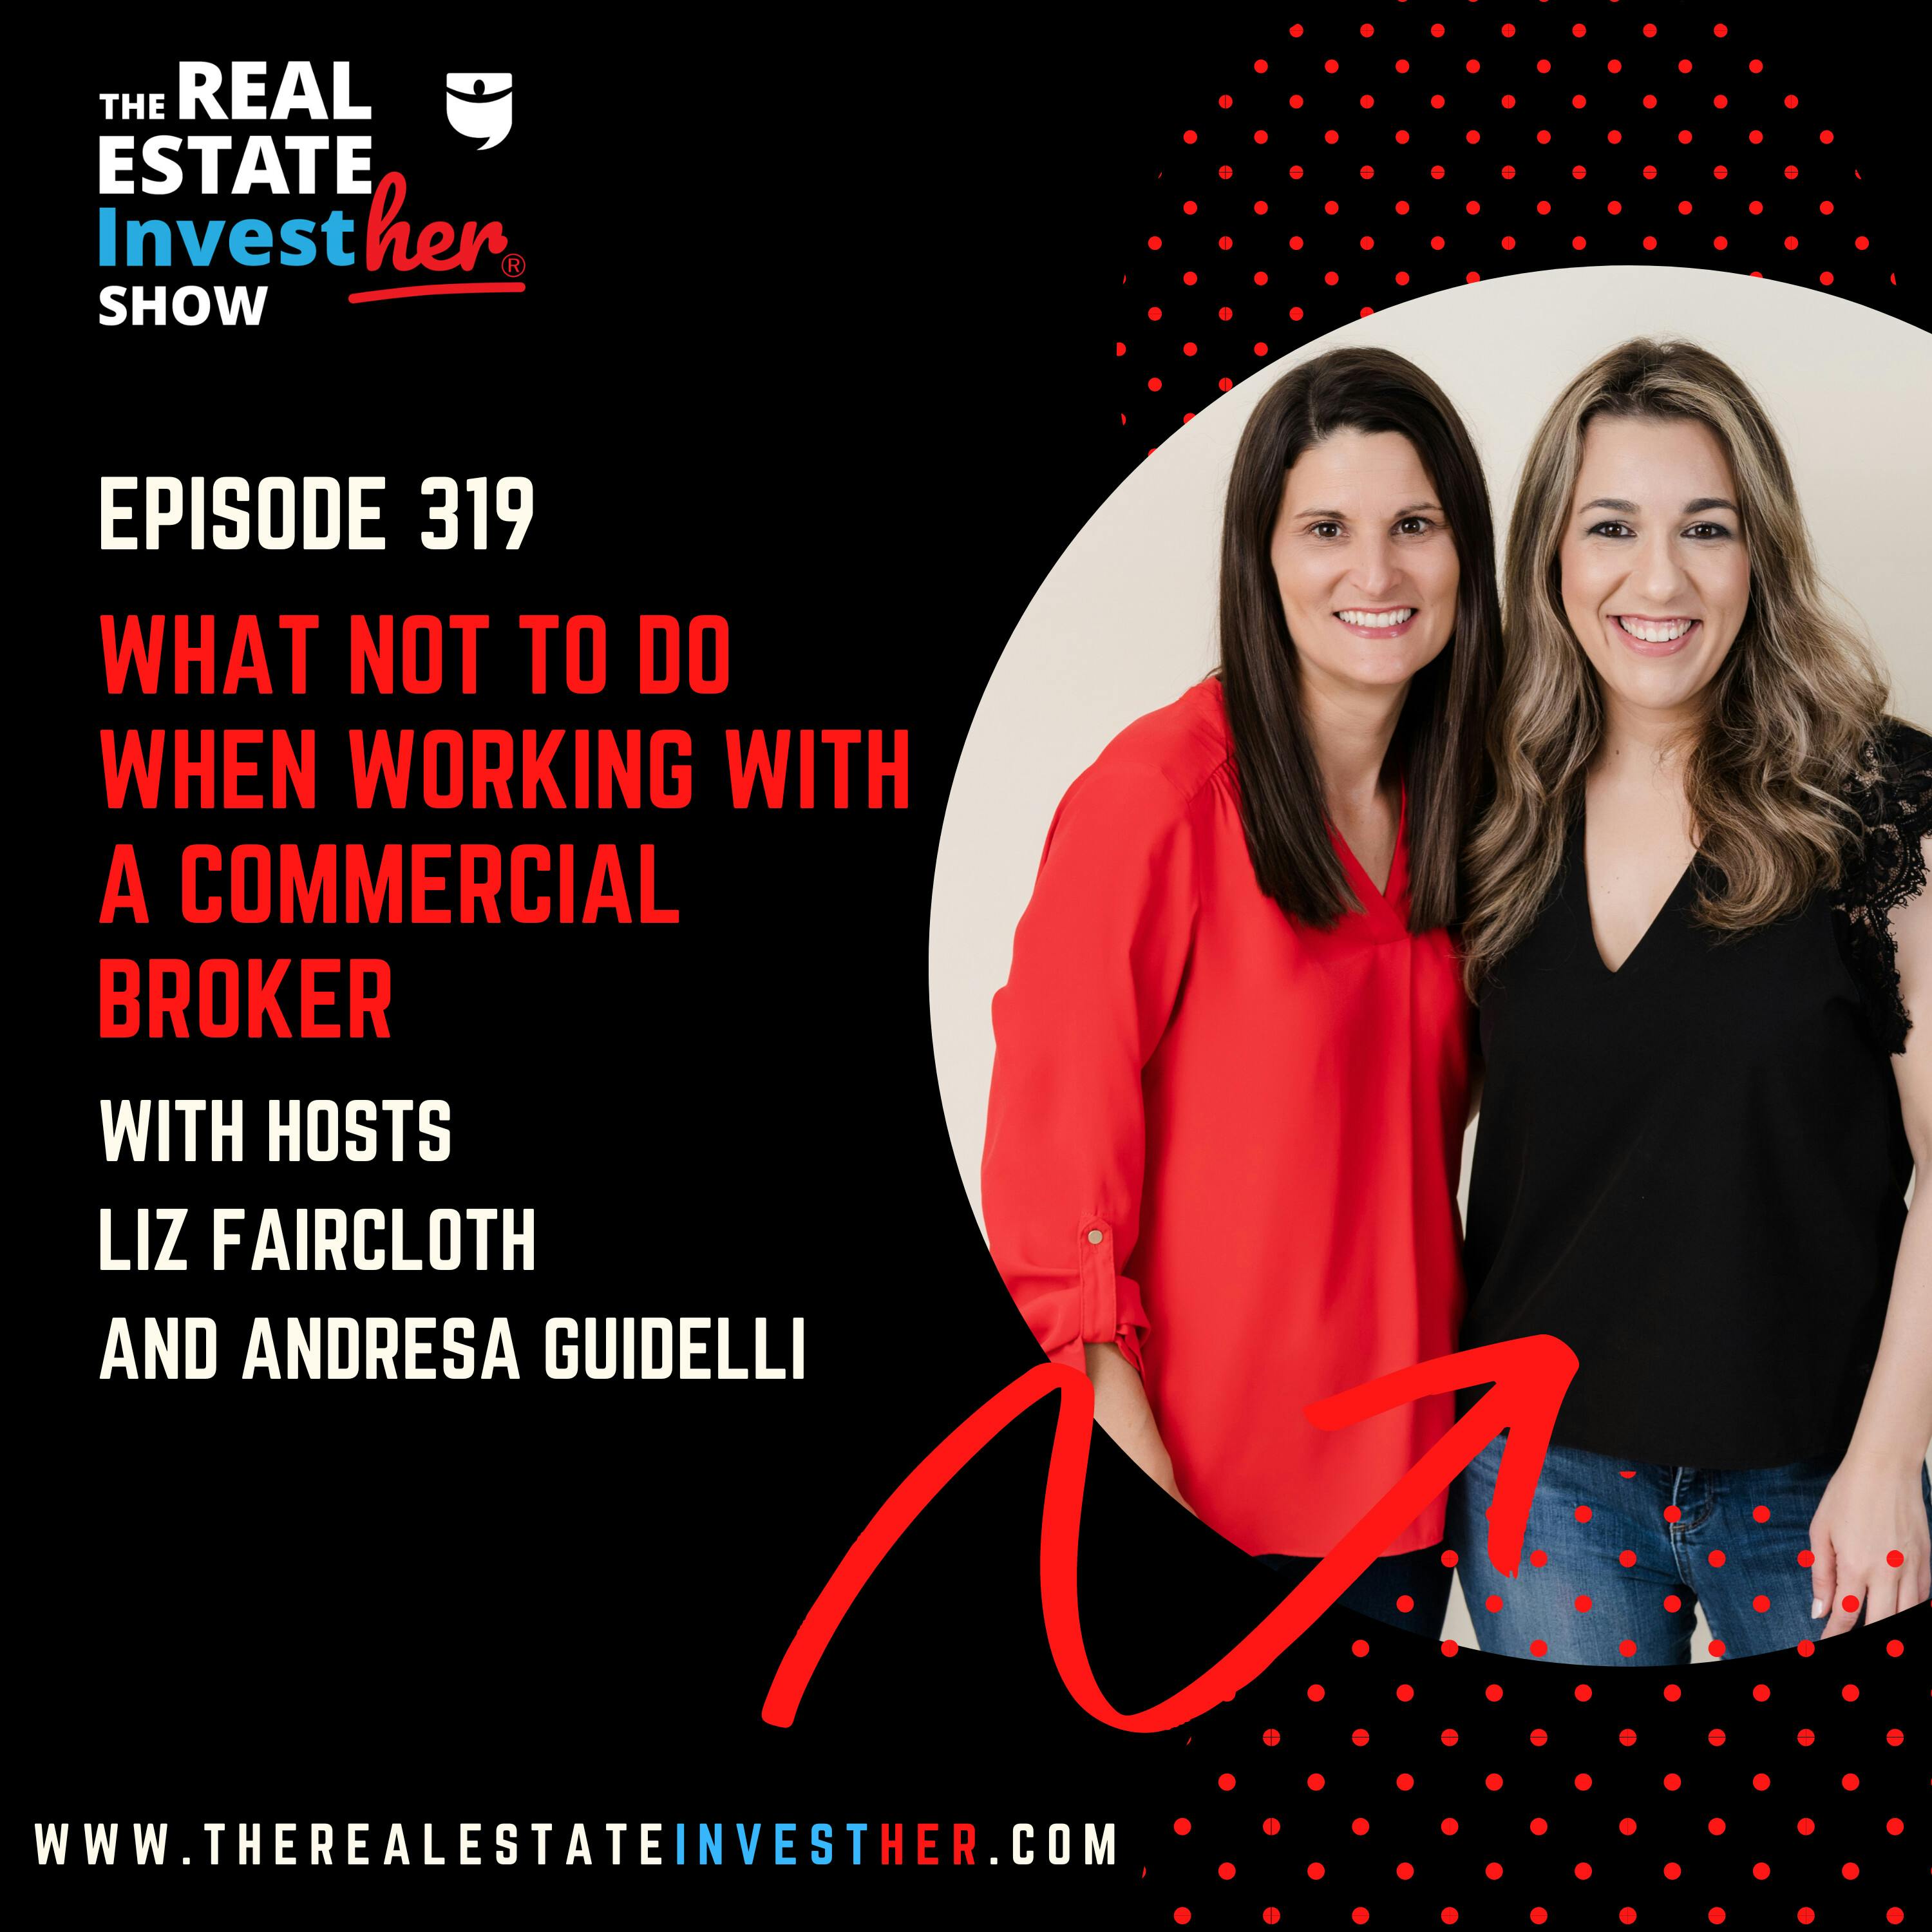 What Not To Do When Working with a Commercial Broker (Minisode)